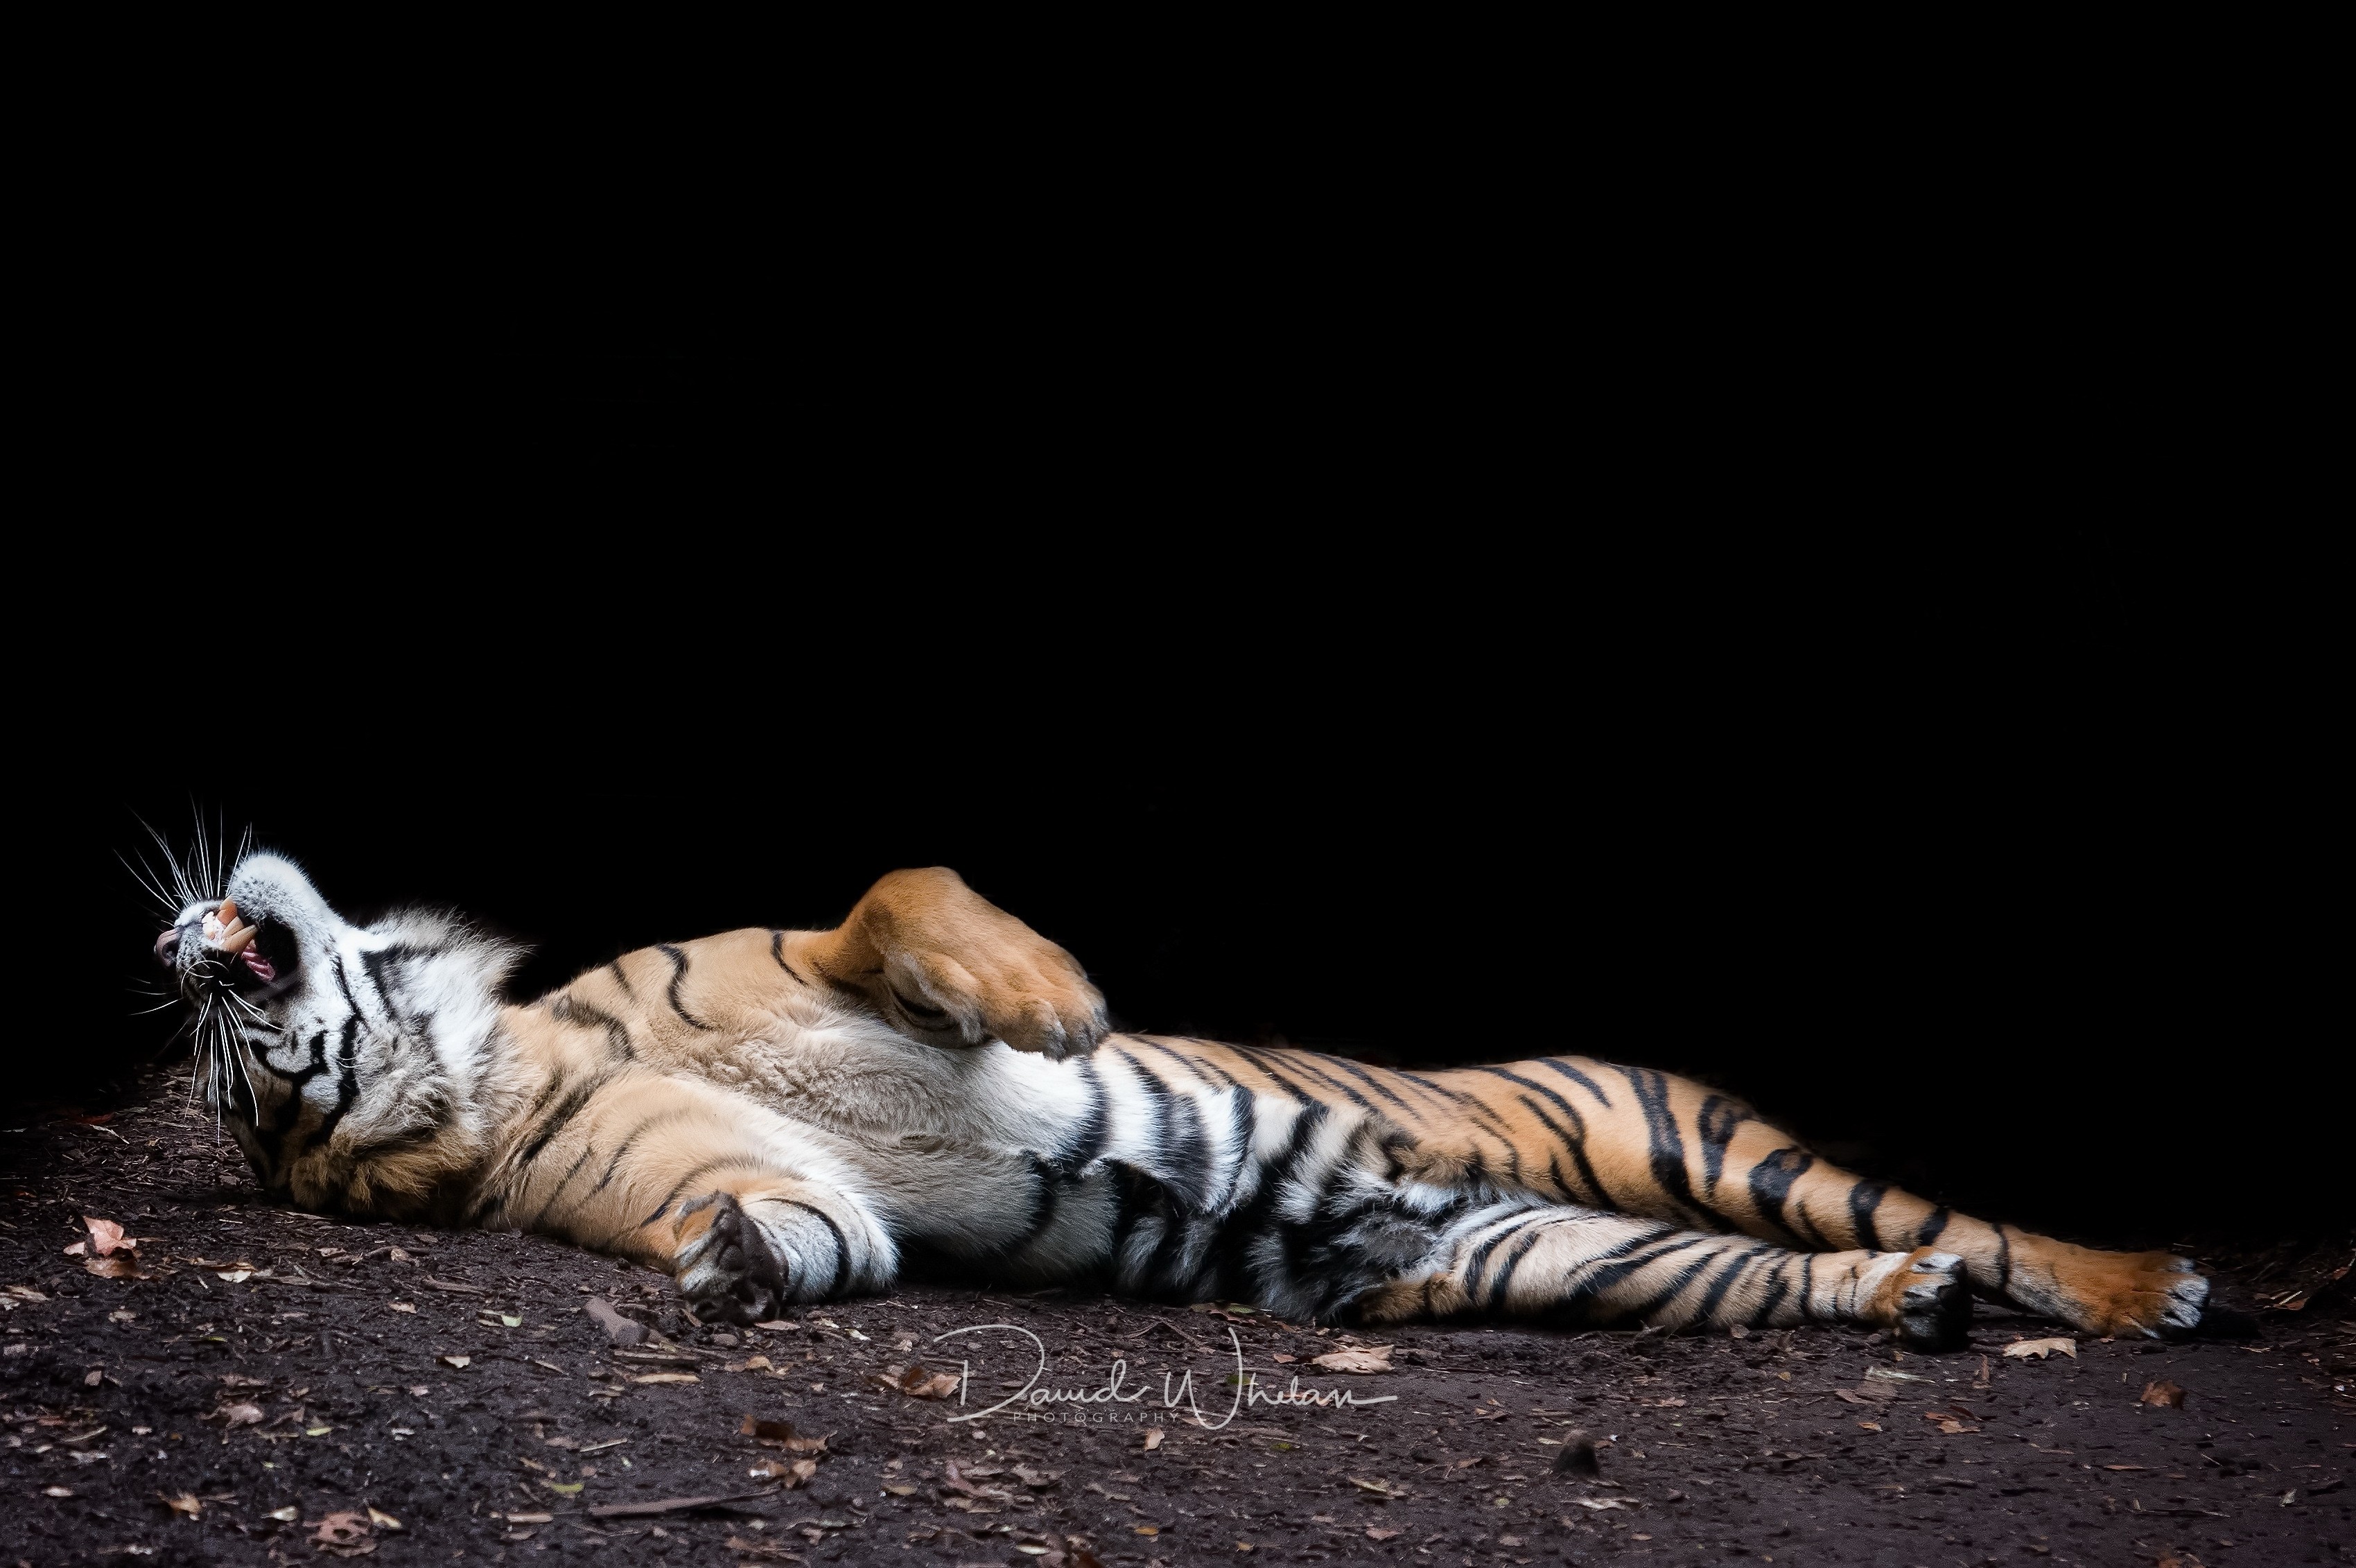 General 3399x2262 animals tiger big cats sleeping mammals black background relaxing simple background